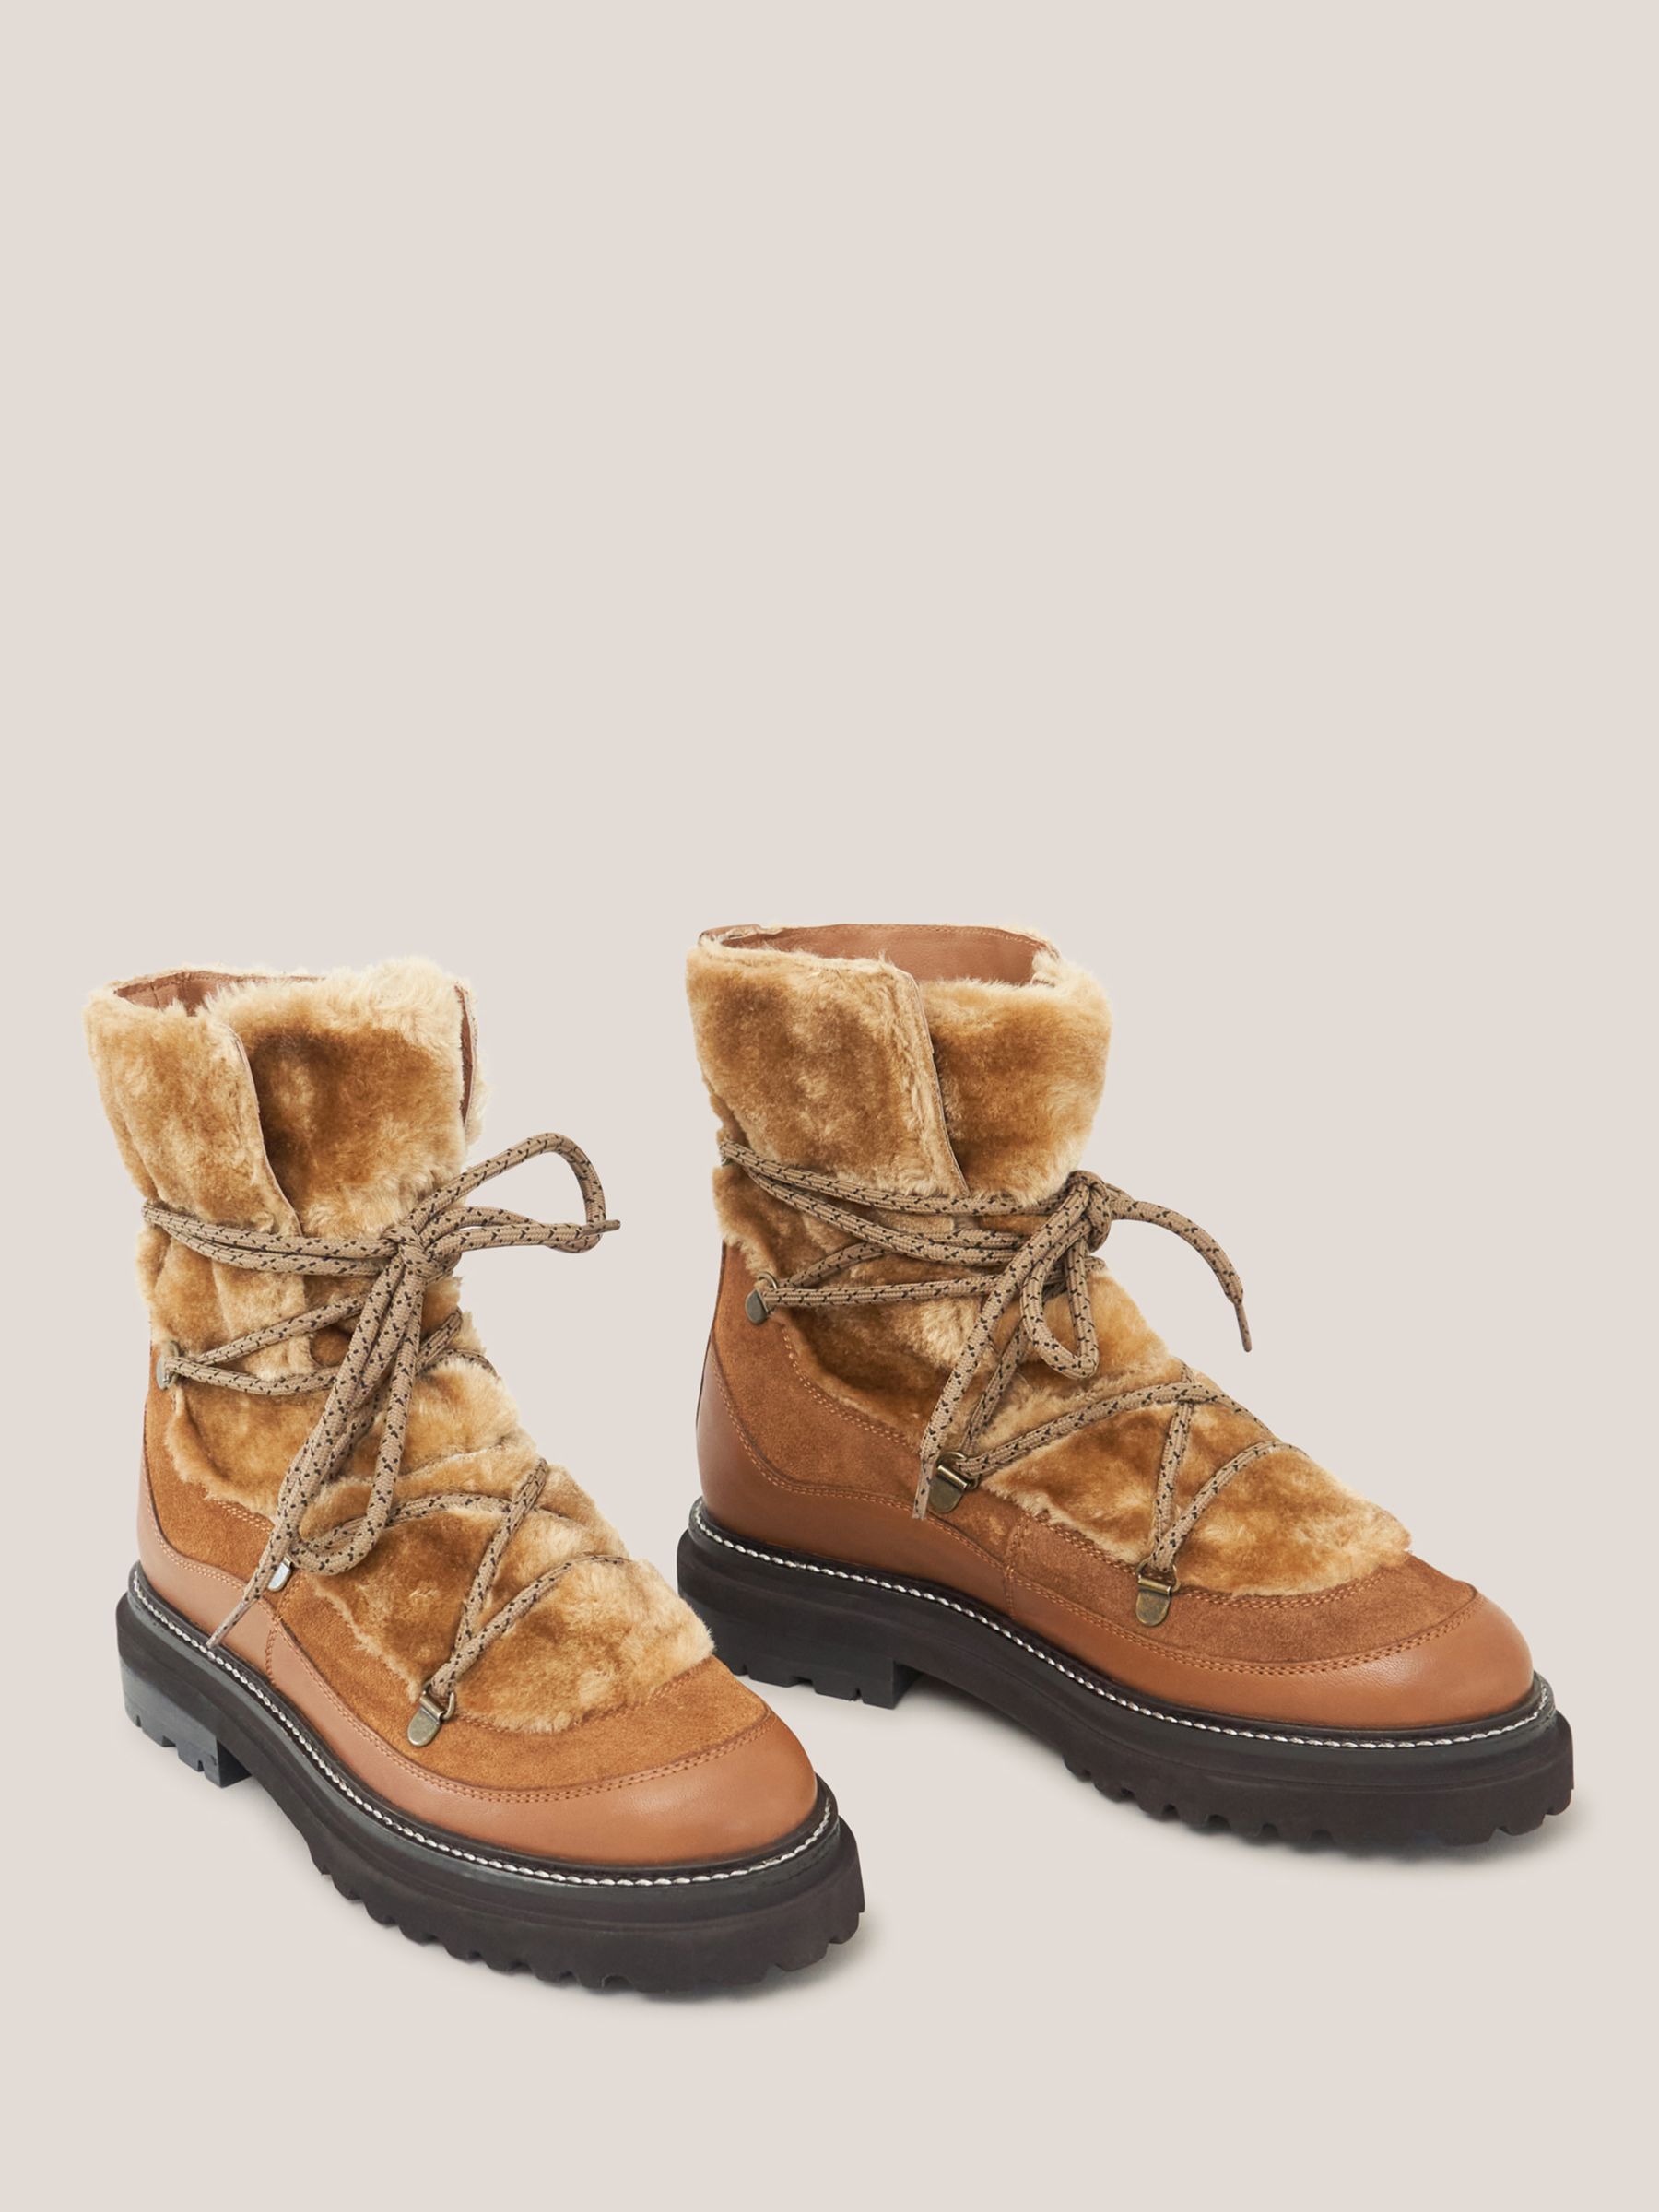 White Stuff Hailey Lace Up Hiker Boots, Mid Tan at John Lewis & Partners